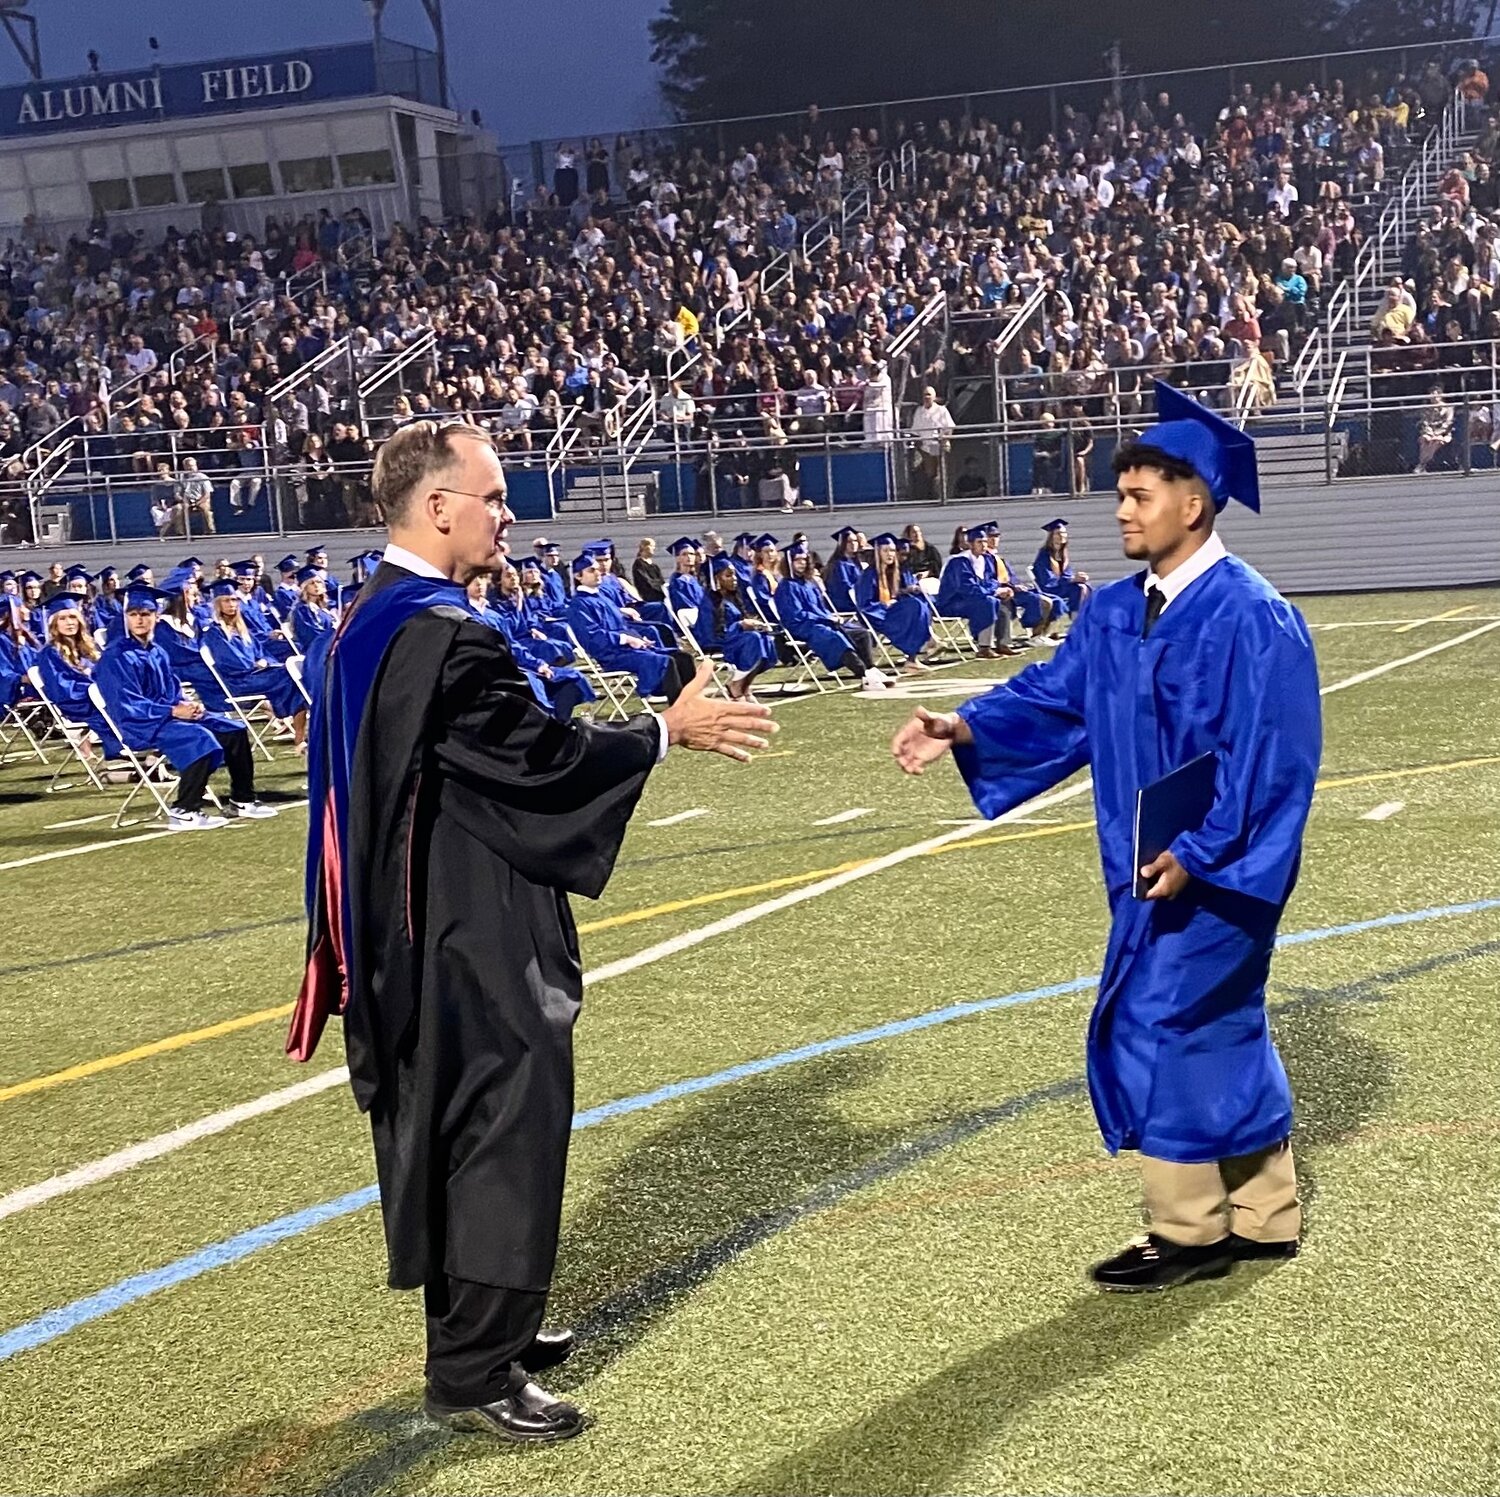 Quakertown Community School District Superintendent Dr. William E. Harner shakes hands with members of the Class of 2023 in what will be the retiring Harner’s final graduation ceremony as superintendent.